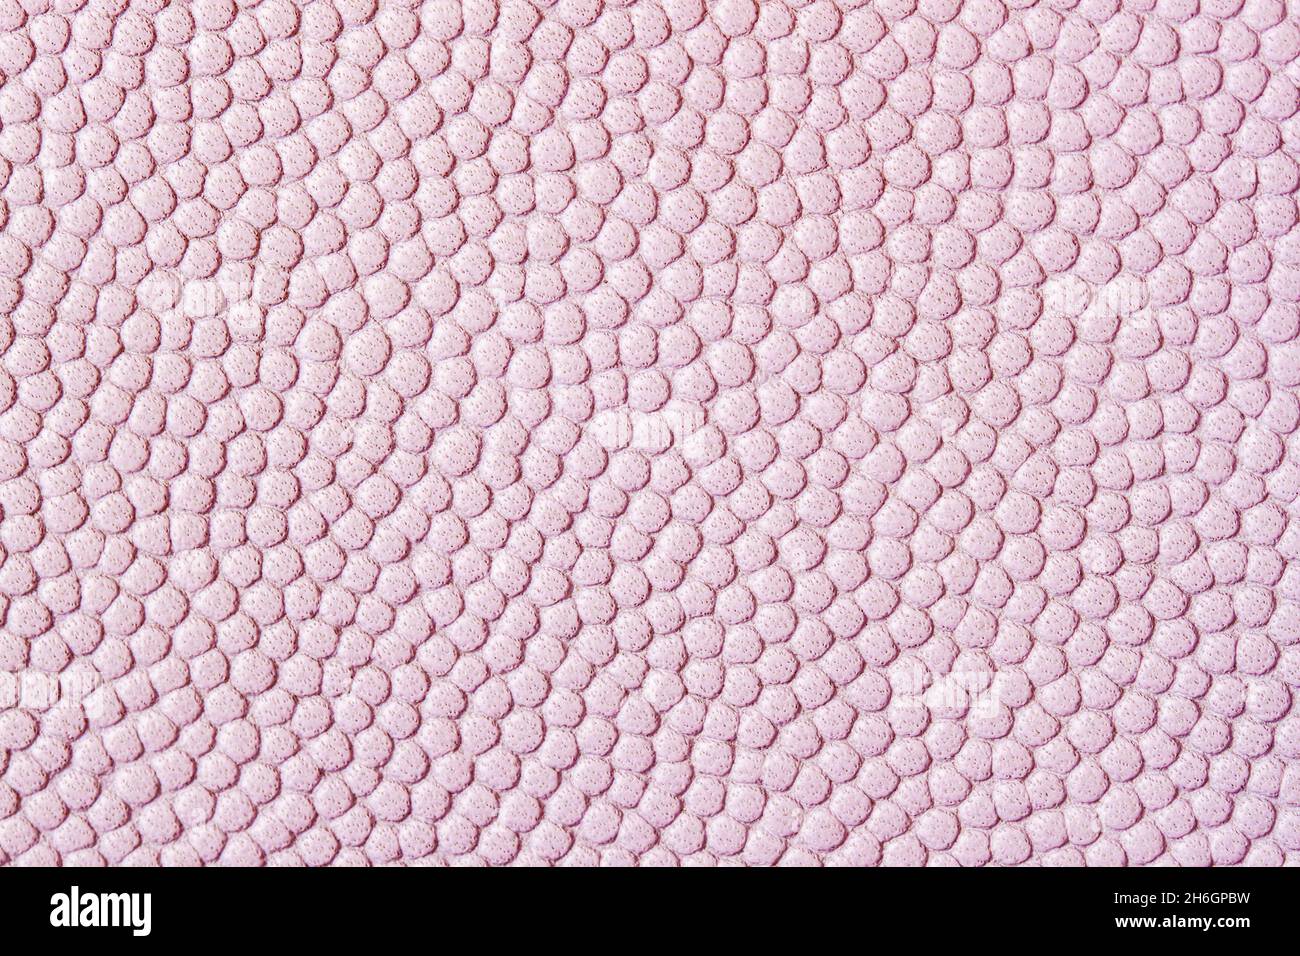 Texture of Genuine Leather, tender sweet pink color print, background, copy space Stock Photo